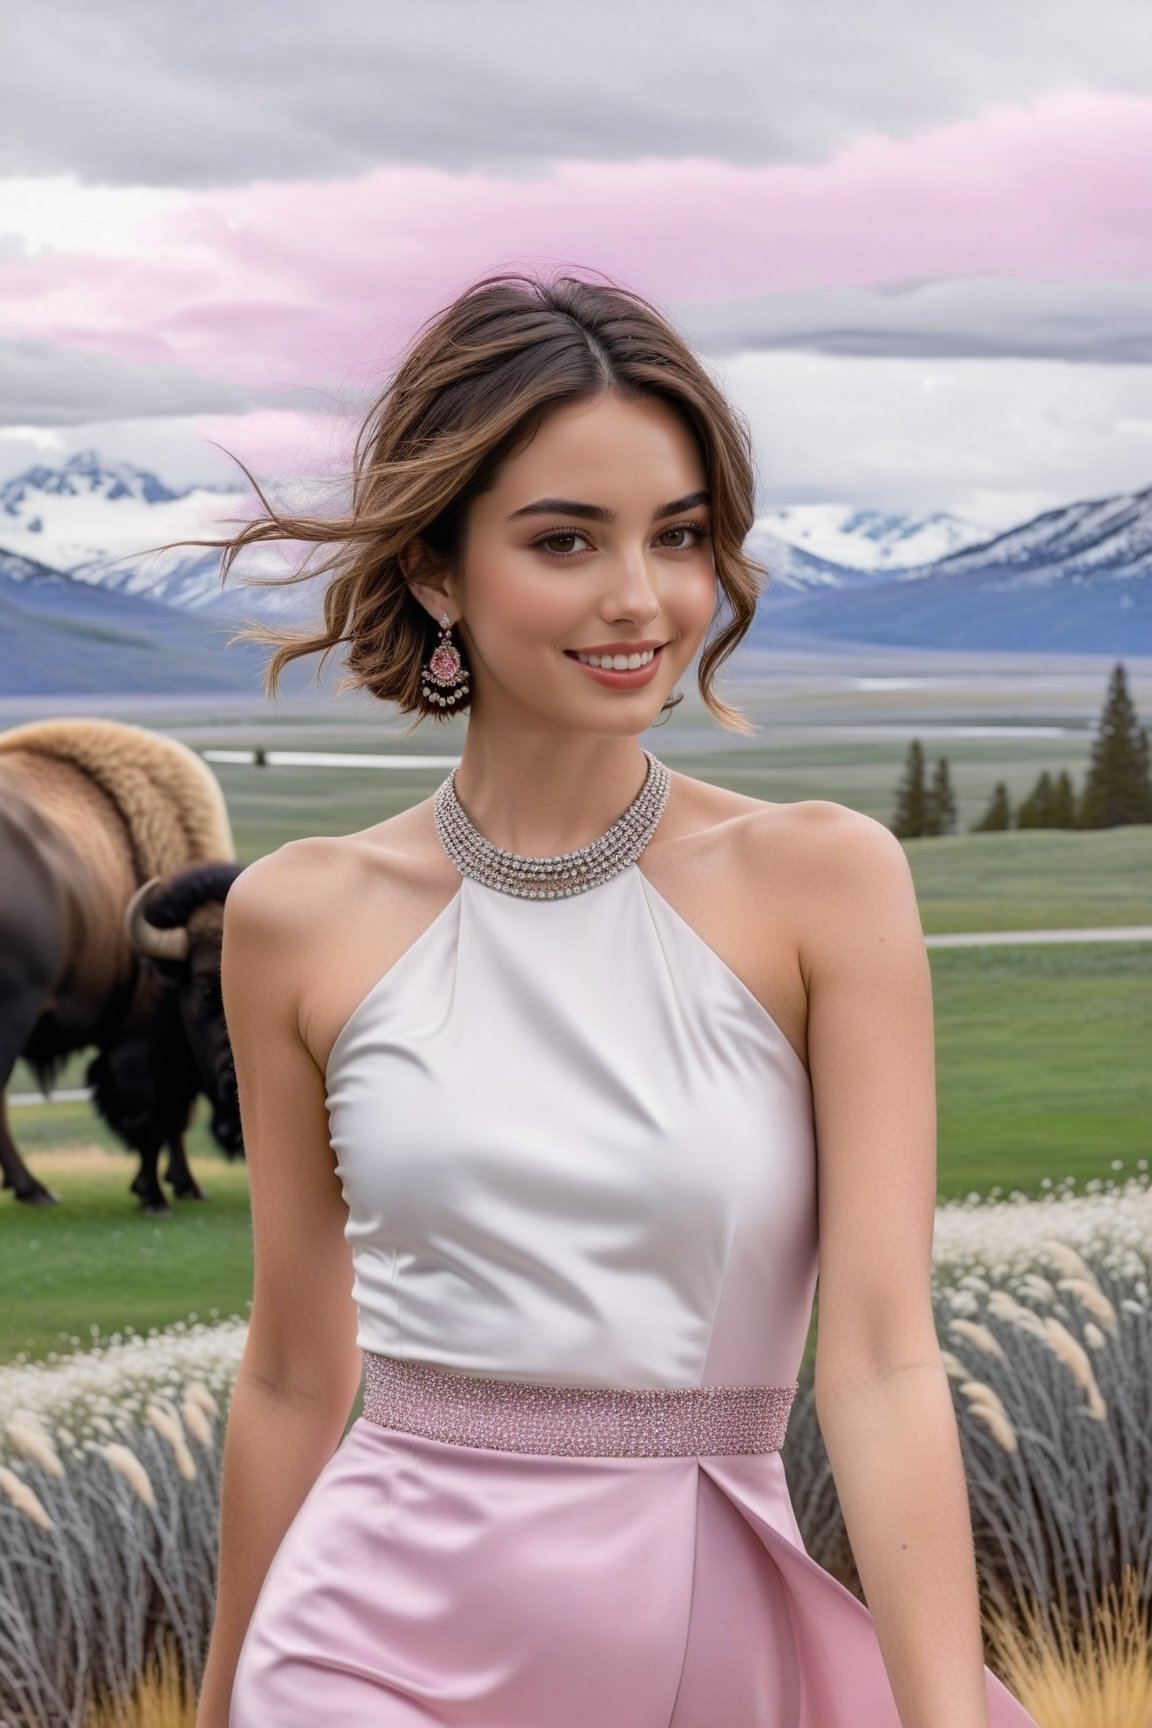 Hyper-Realistic photo of a girl,20yo,1girl,Ana de Armas,perfect female form,perfect body proportion,perfect anatomy,[pink and white color],elegant dress,detailed exquisite face,soft shiny skin,smile,mesmerizing,short hair,small earrings,necklaces,Chanel bag,cluttered maximalism
BREAK
(backdrop of lamarva11ey,outdoors,sky,day, cloud,tree,cloudy sky,grass,nature,beautiful scenery,mountain,winding road,landscape,american bisons),(girl focus:1.2)
BREAK
(rule of thirds:1.3),perfect composition,studio photo,trending on artstation,(Masterpiece,Best quality,32k,UHD:1.4),(sharp focus,high contrast,HDR,hyper-detailed,intricate details,ultra-realistic,award-winning photo,ultra-clear,kodachrome 800:1.25),(infinite depth of perspective:2),(chiaroscuro lighting,soft rim lighting:1.15),by Karol Bak,Antonio Lopez,Gustav Klimt and Hayao Miyazaki,photo_b00ster,real_booster,art_booster,Ye11owst0ne